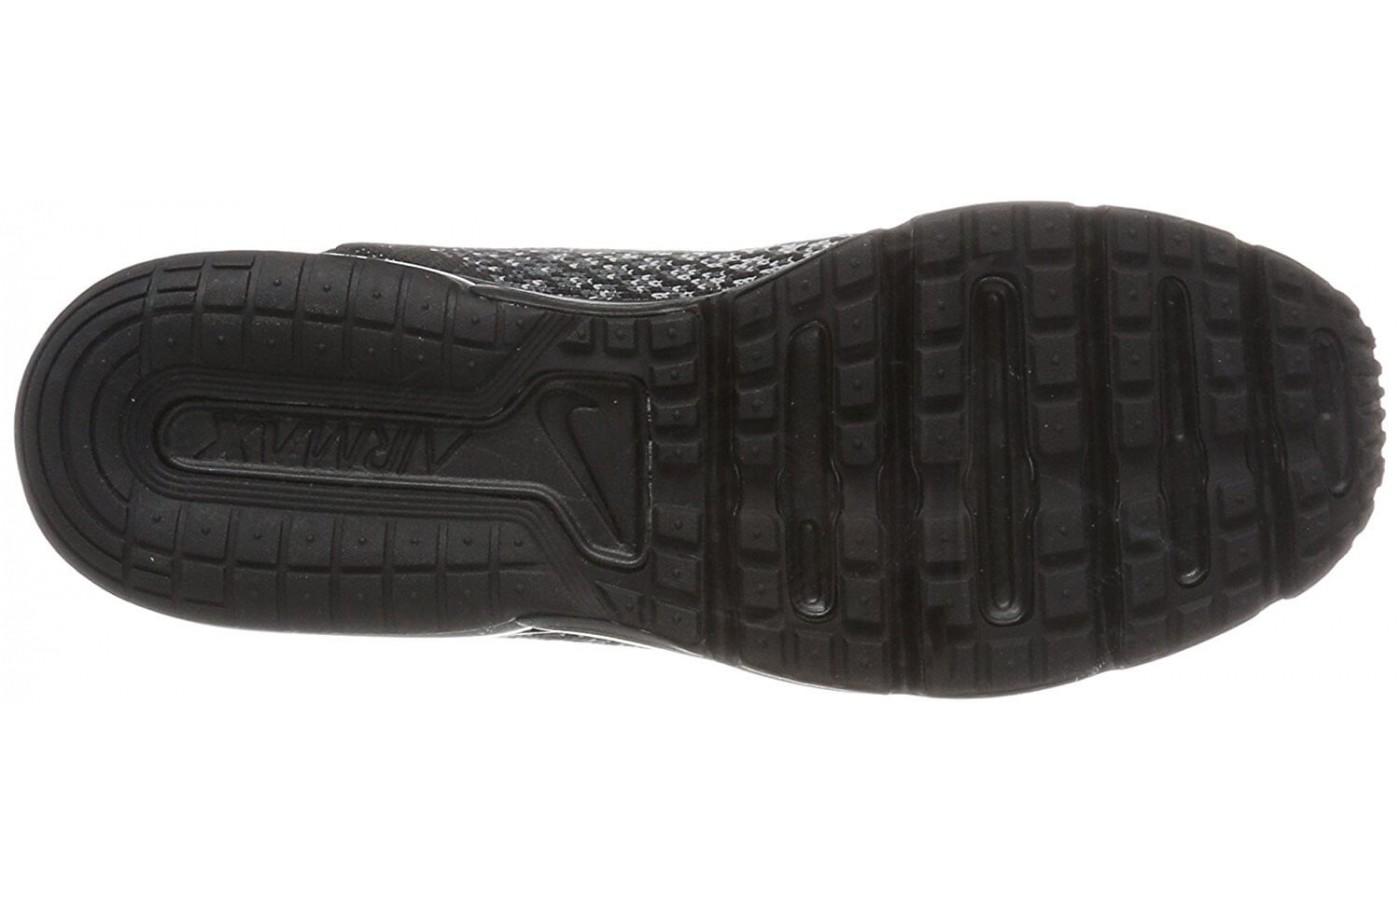 The outsole makes this a great shoe for everyday wear or cross training